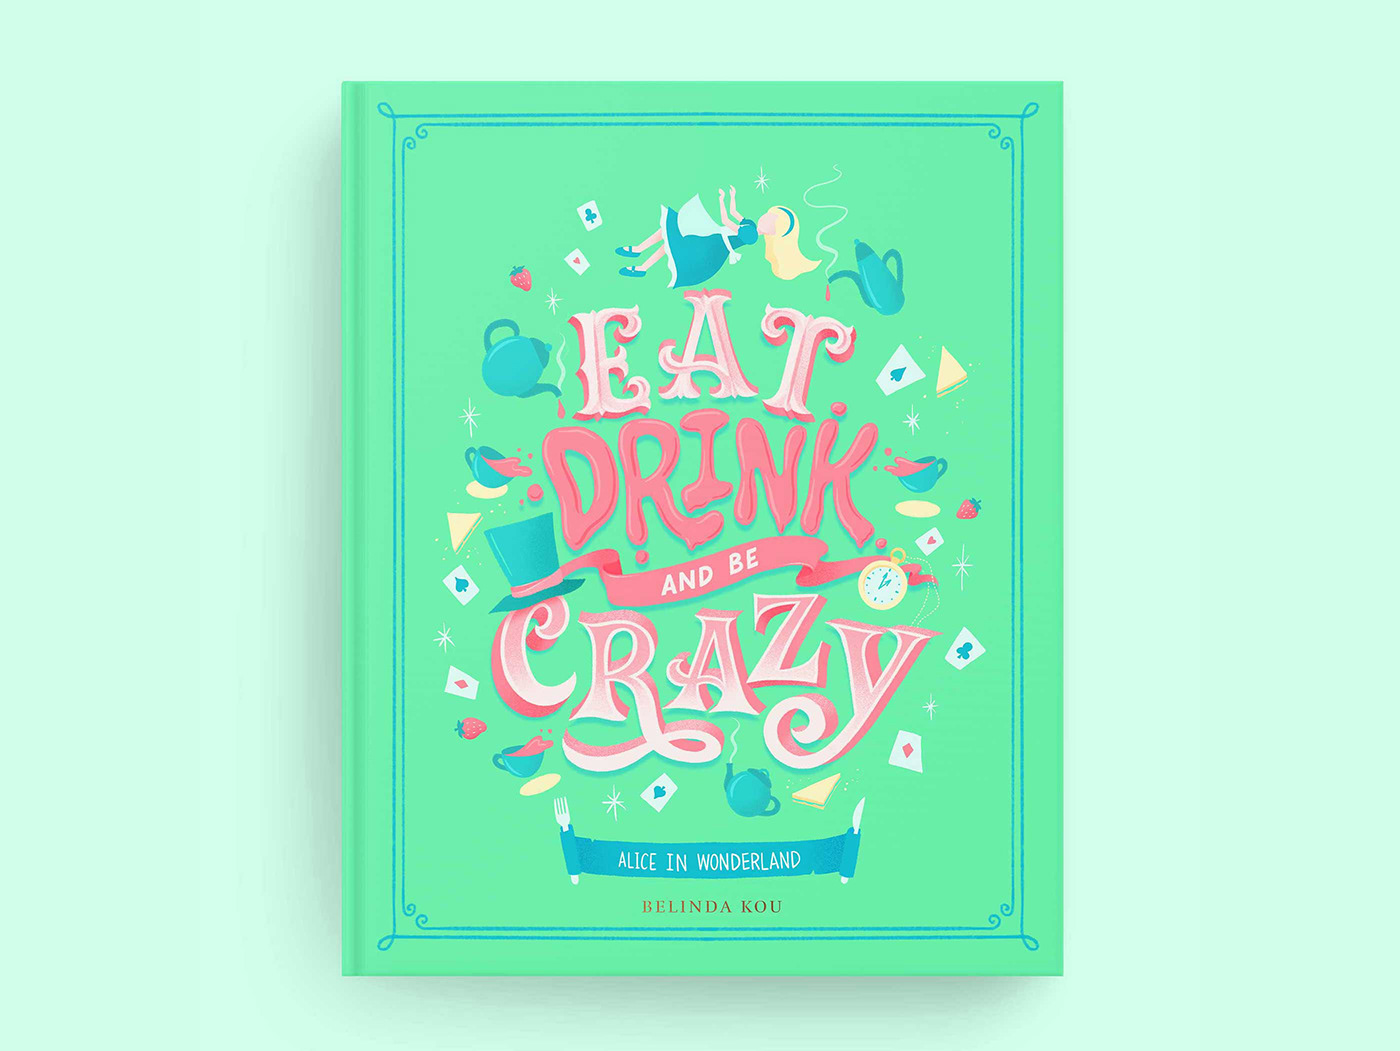 Alice in Wonder book cover art featuring hand lettering and illustrations of fairy tale and food art